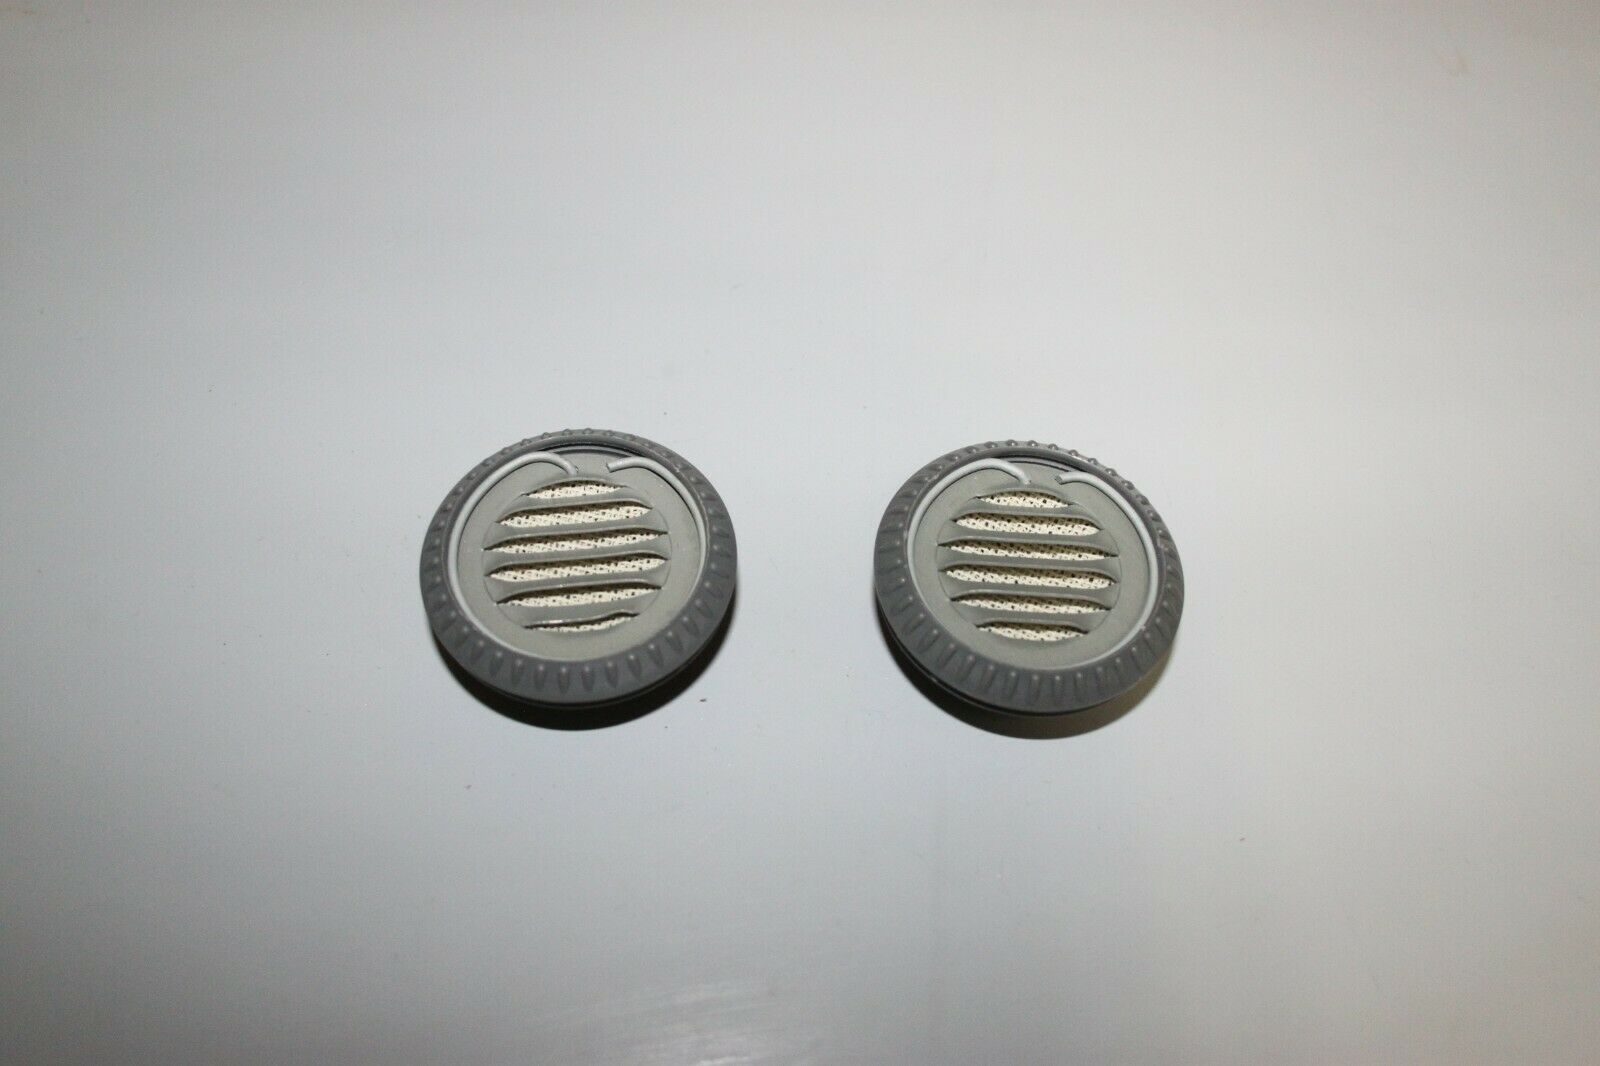 CZECH MILITARY GAS MASK FILTER INLETS (ONLY) FOR M10 AND M10M TO ATTACH FILTERS